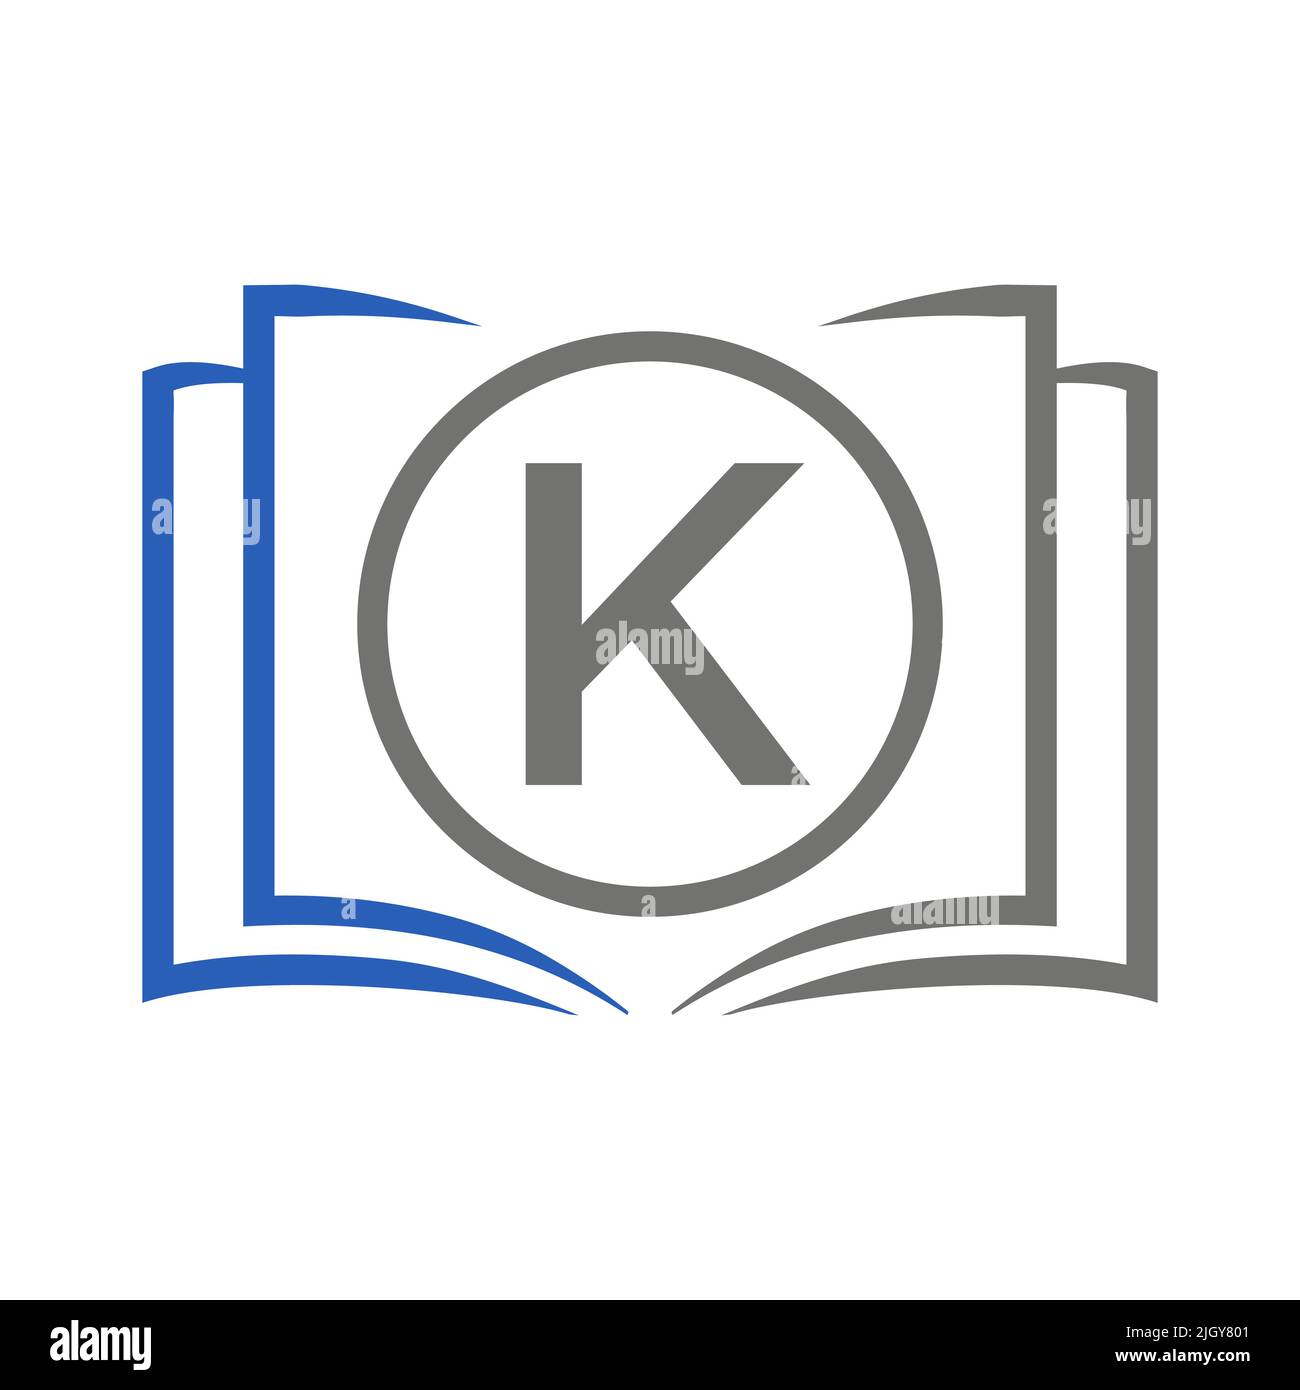 Education Logo On Letter K Template. Open Book Logo On K Letter, Initial Educational Sign Concept Template Stock Vector